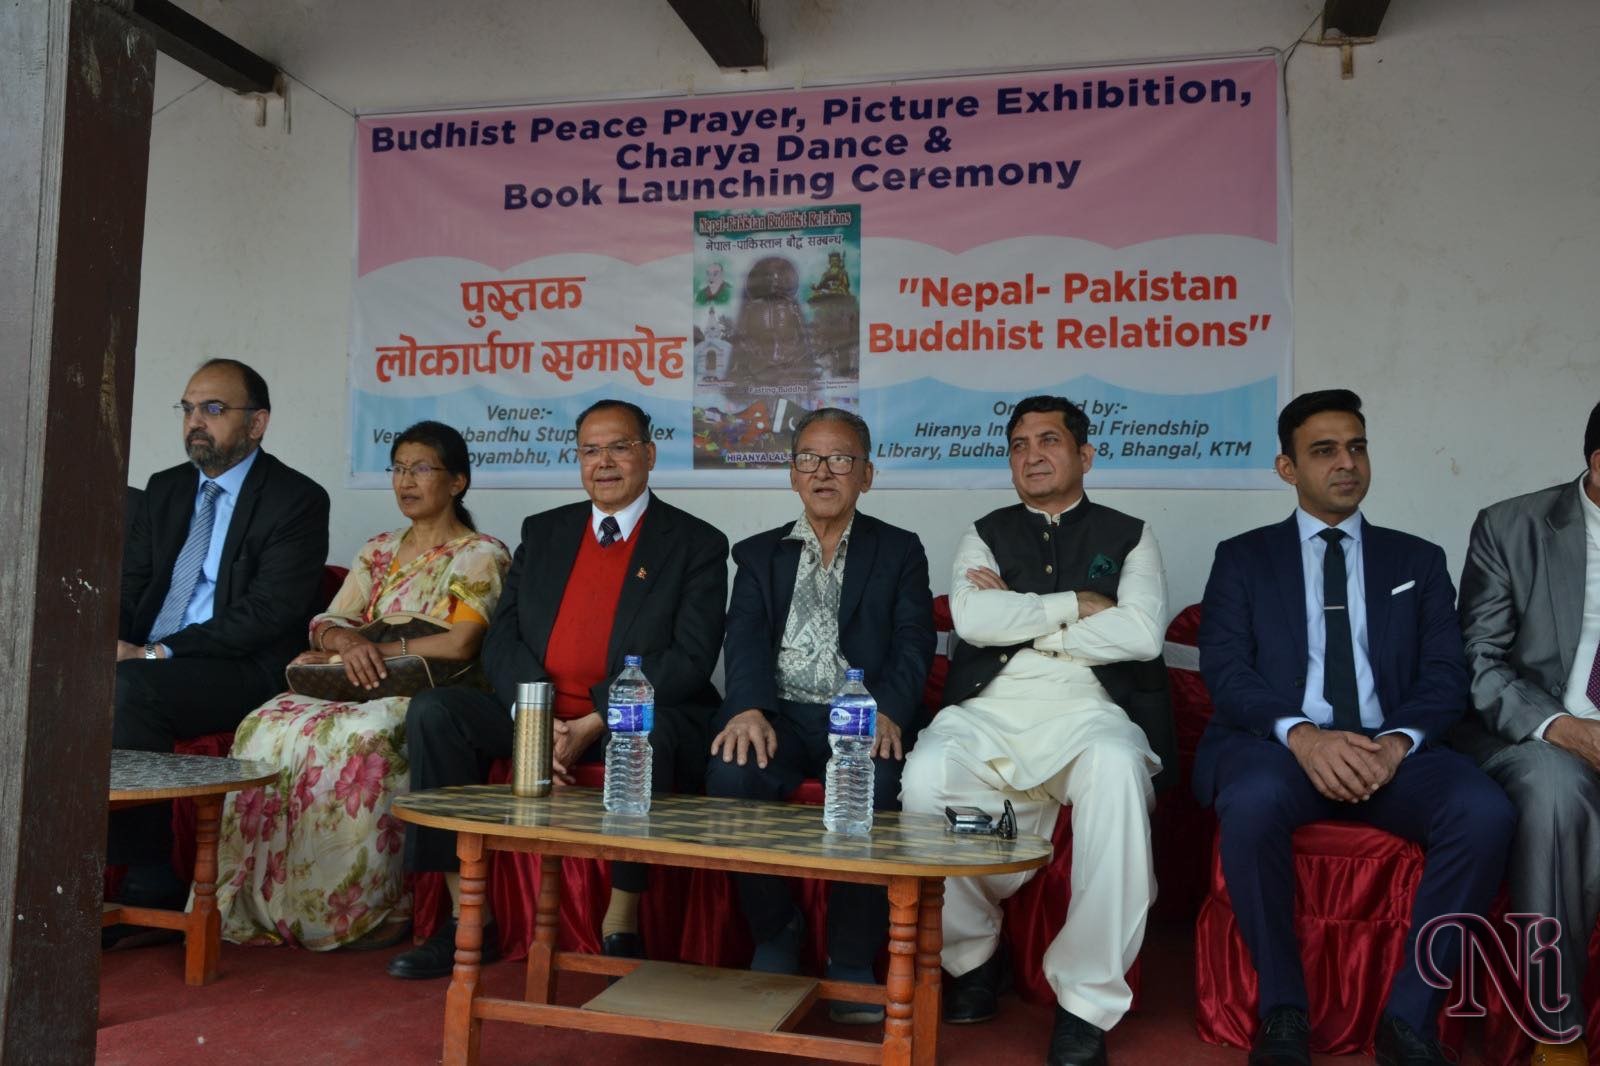 Book on “Nepal-Pakistan Buddhist Relations” launched